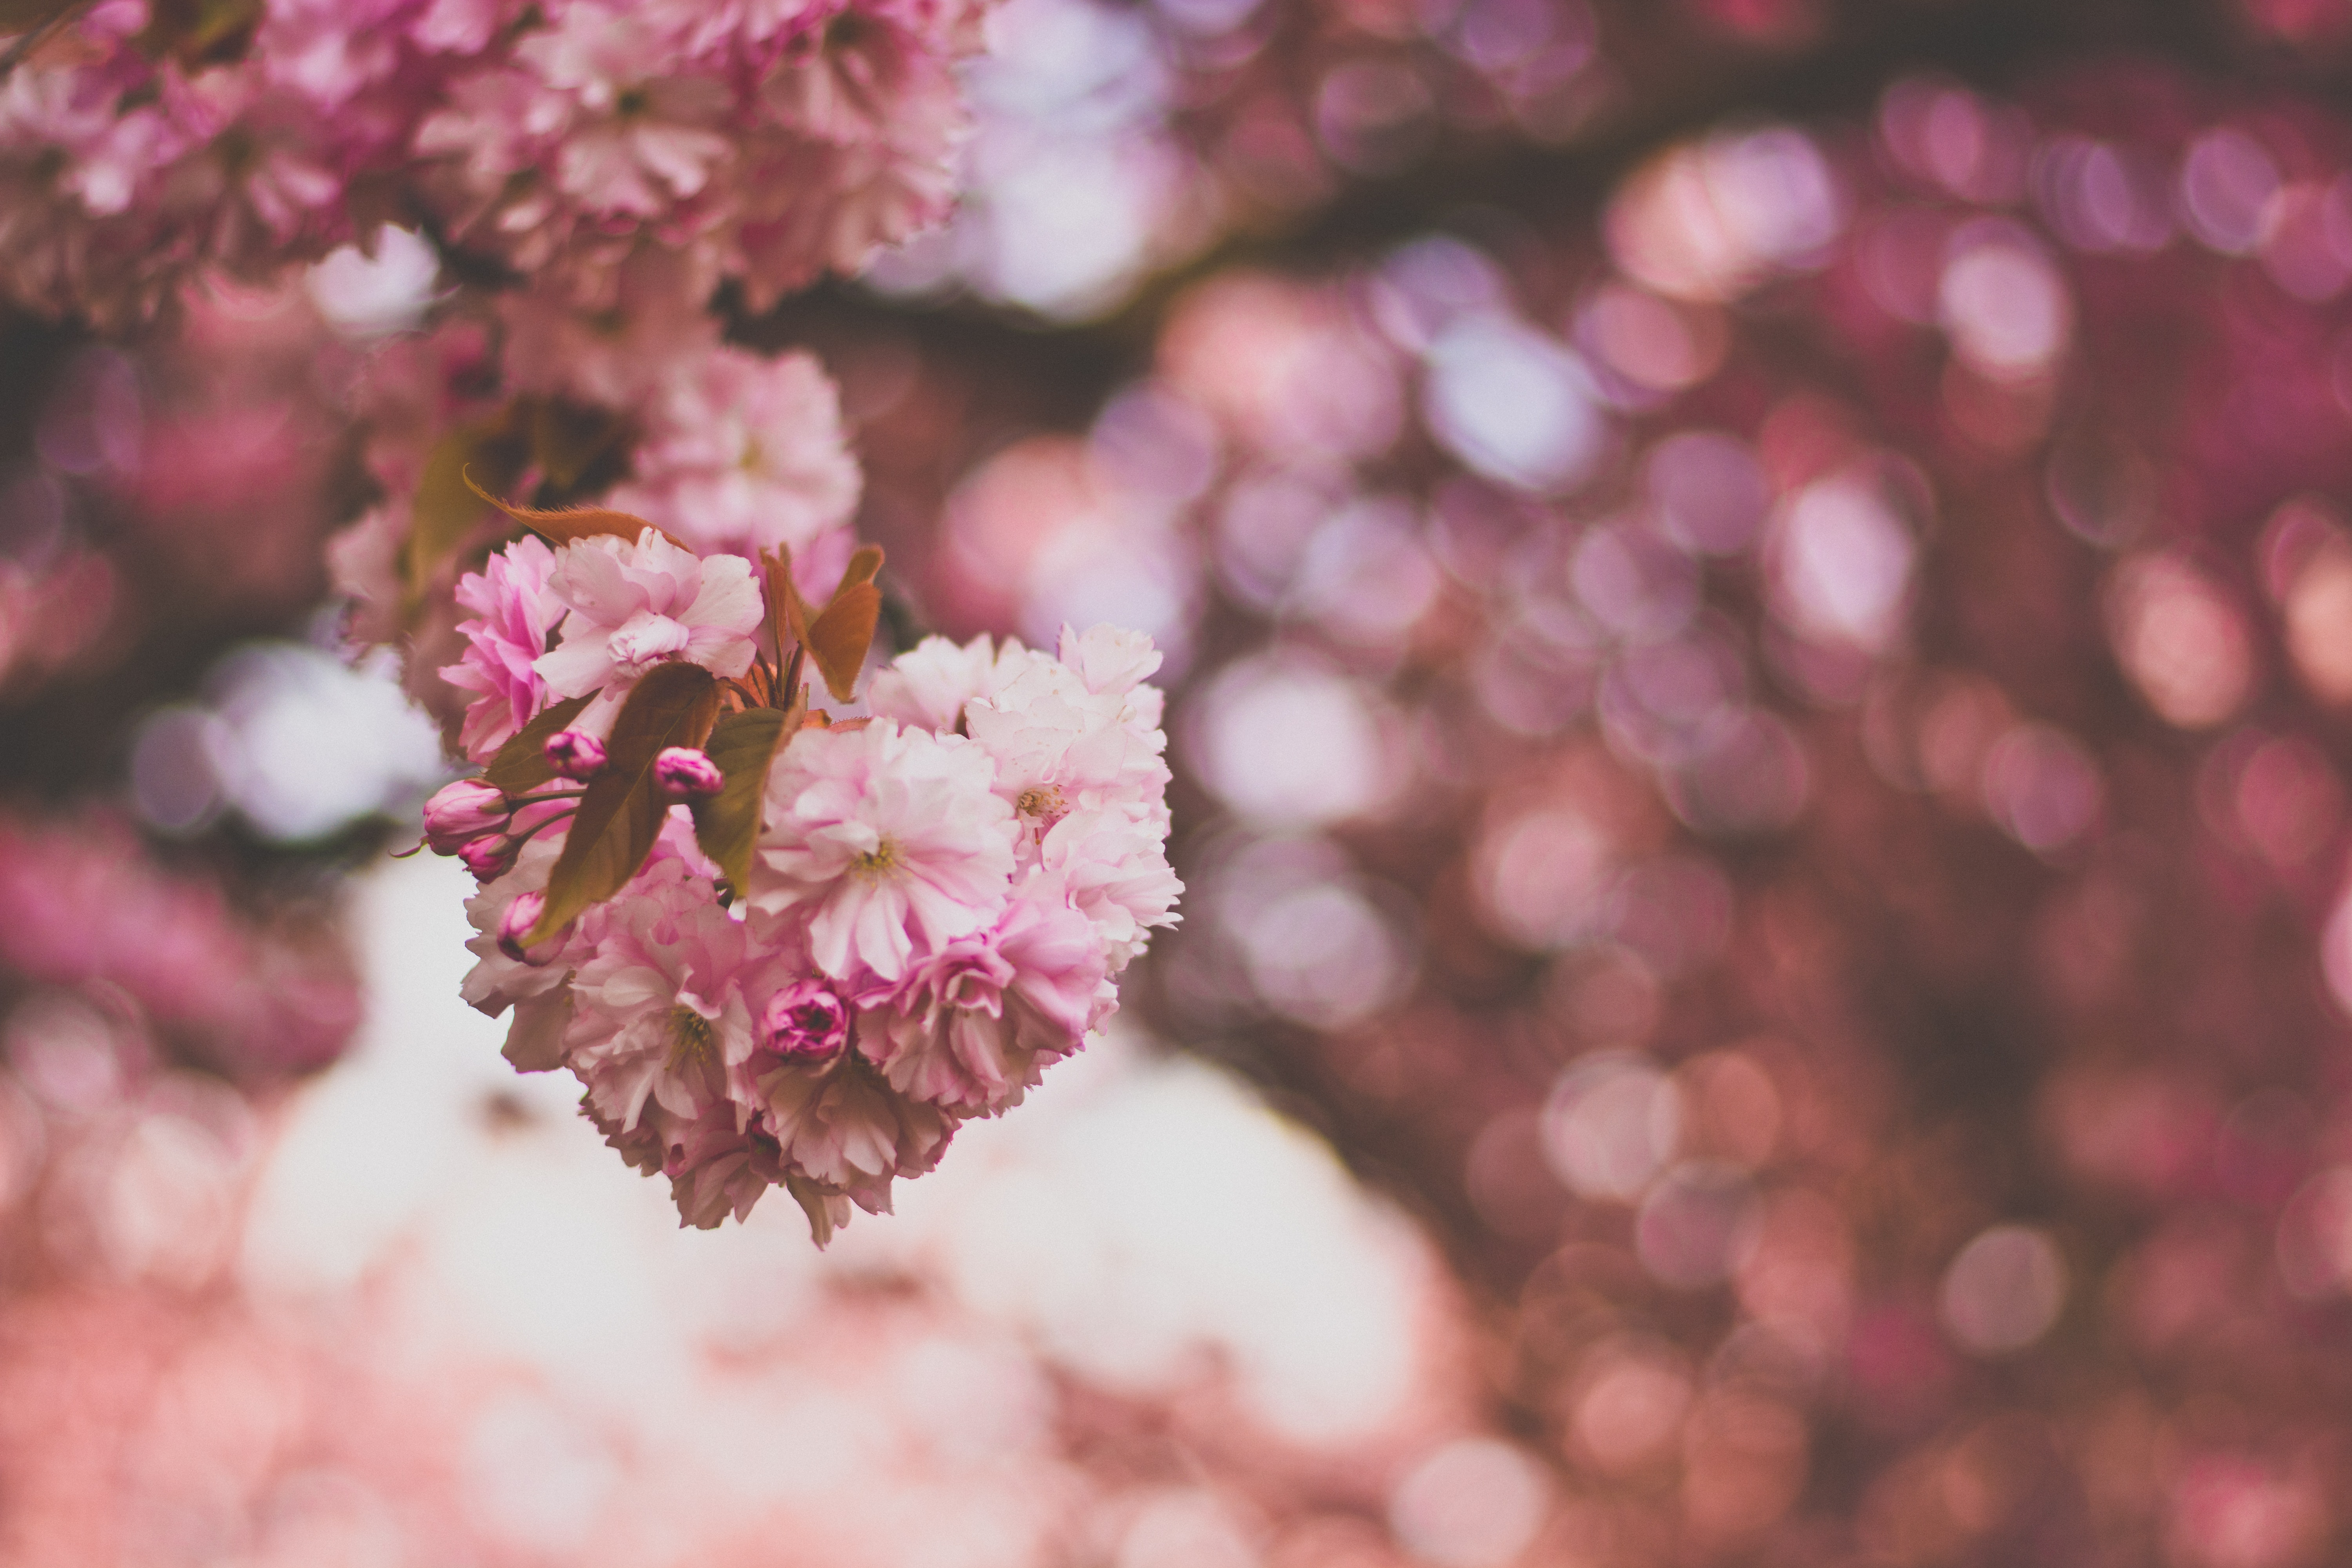 Selective focus photography of pink and white petaled flowers